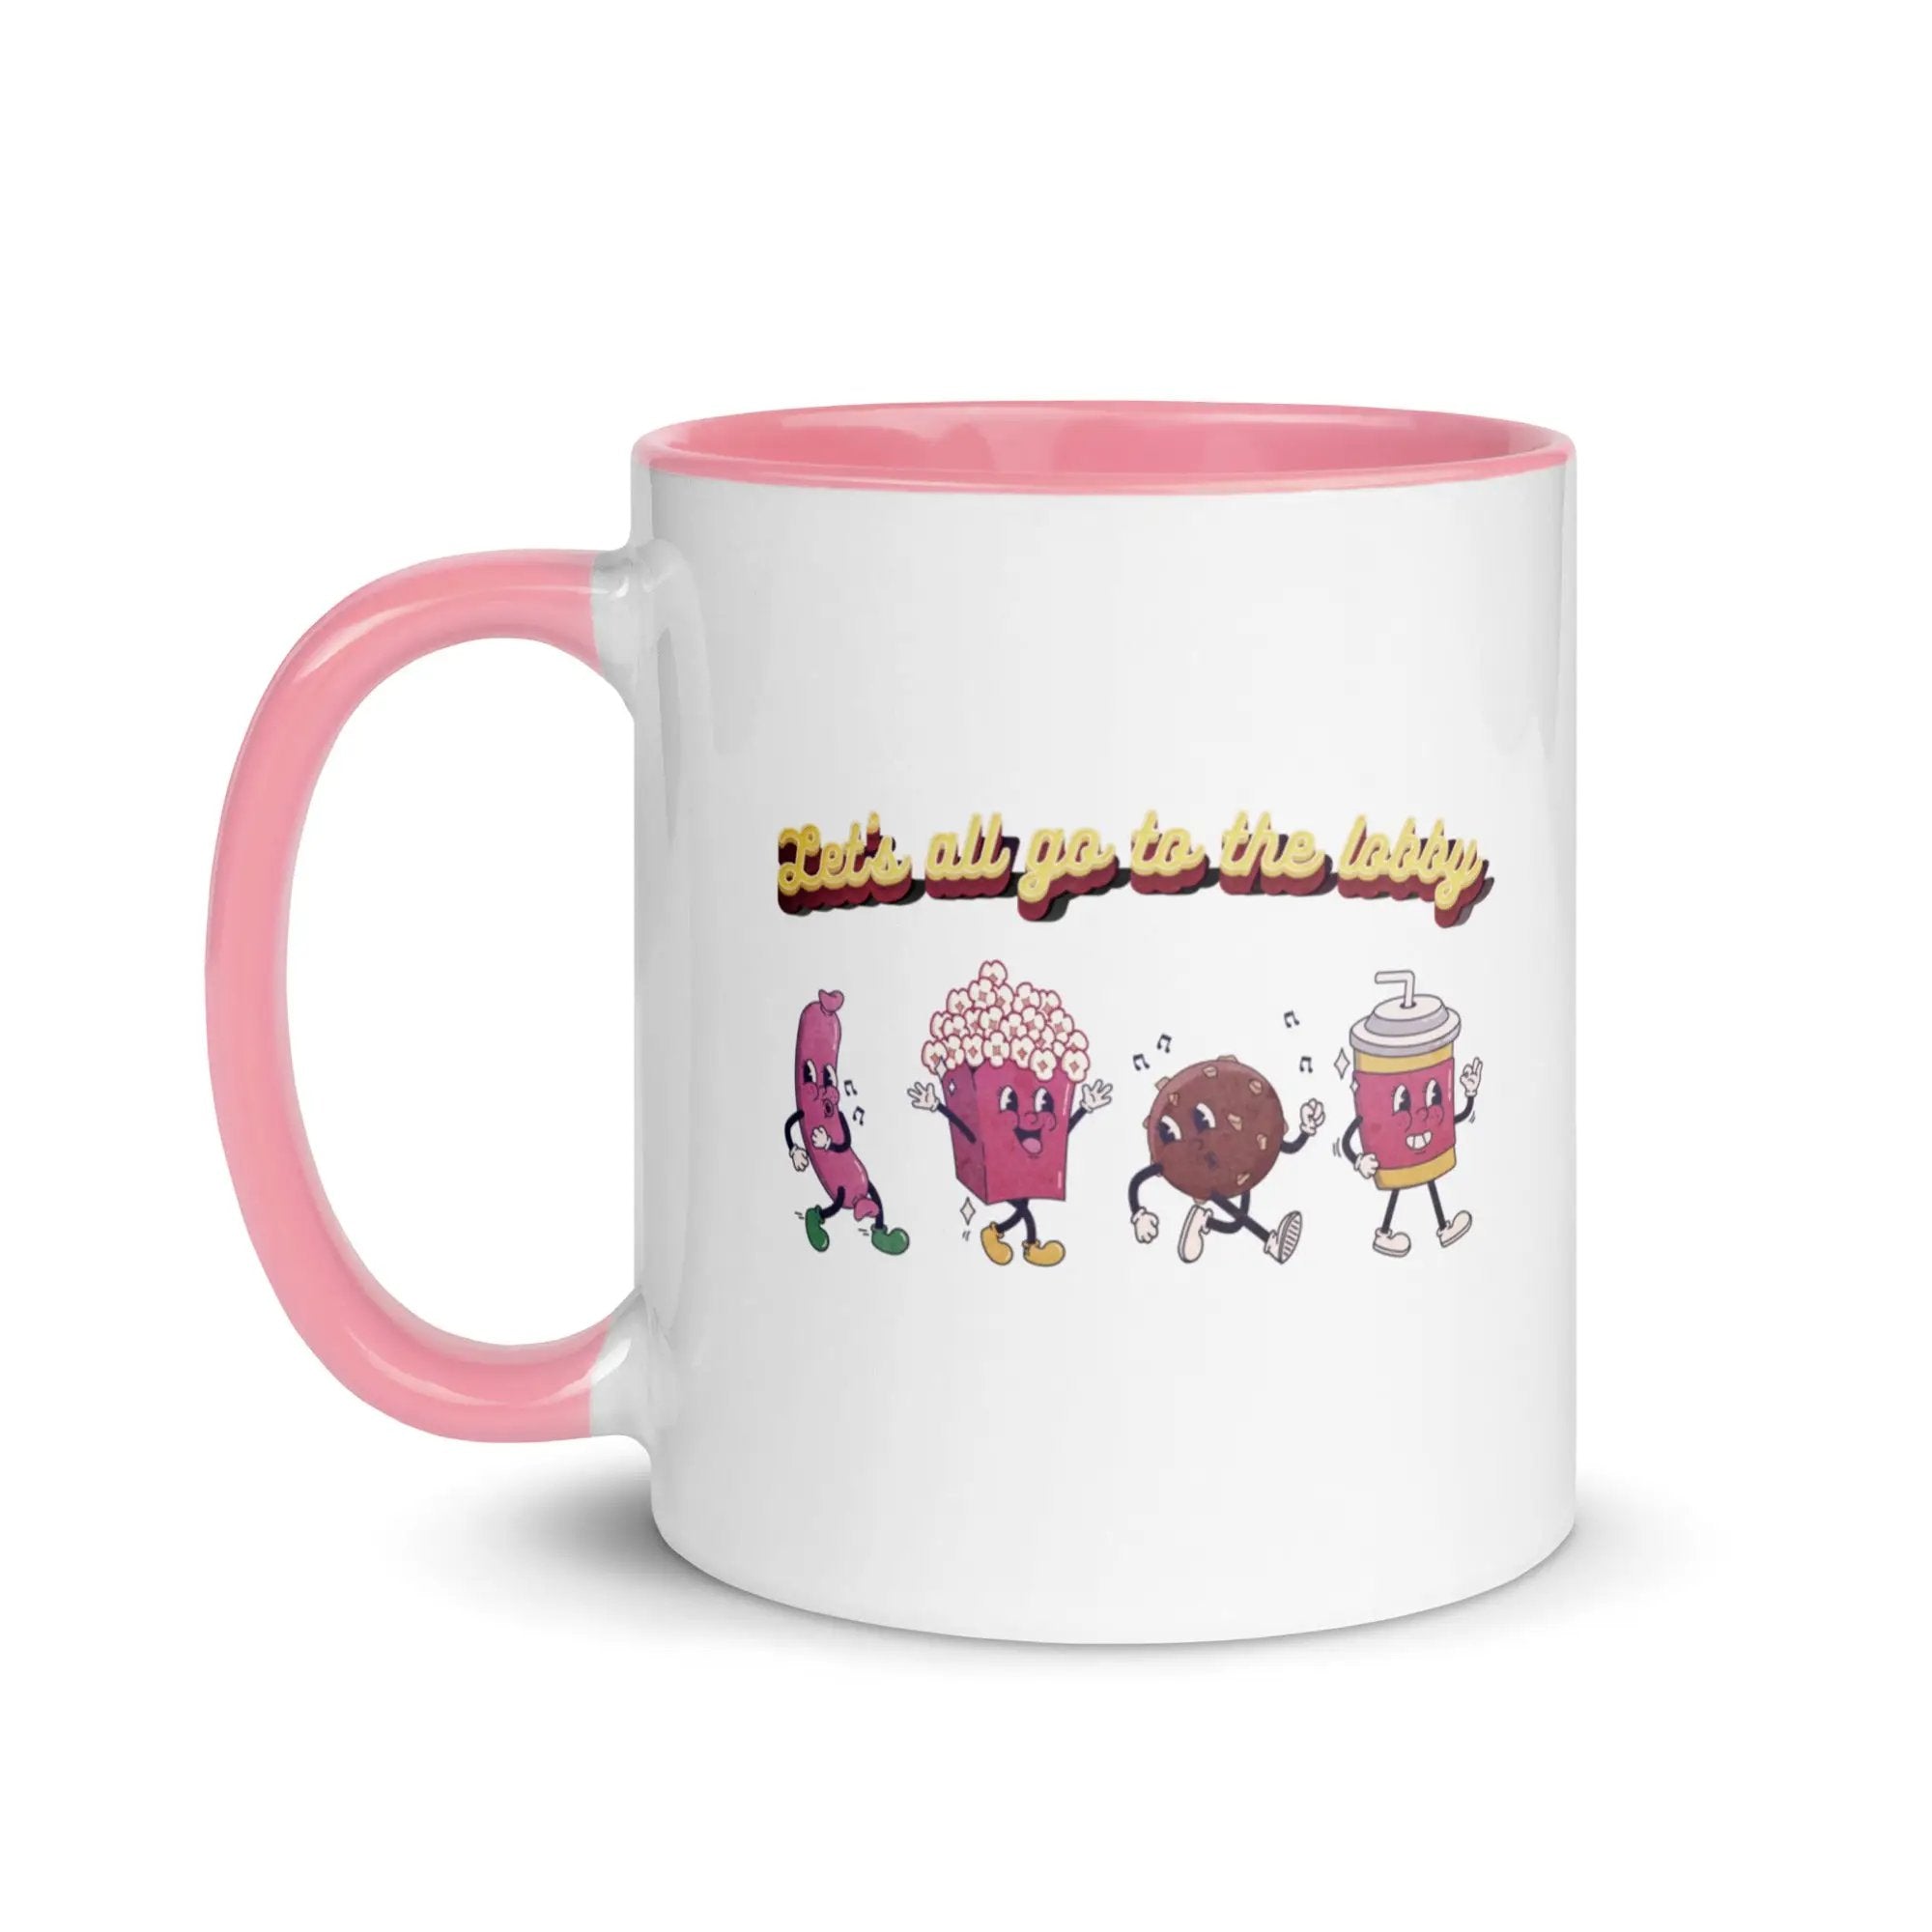 Let's All Go To The Lobby Mug with Color Inside